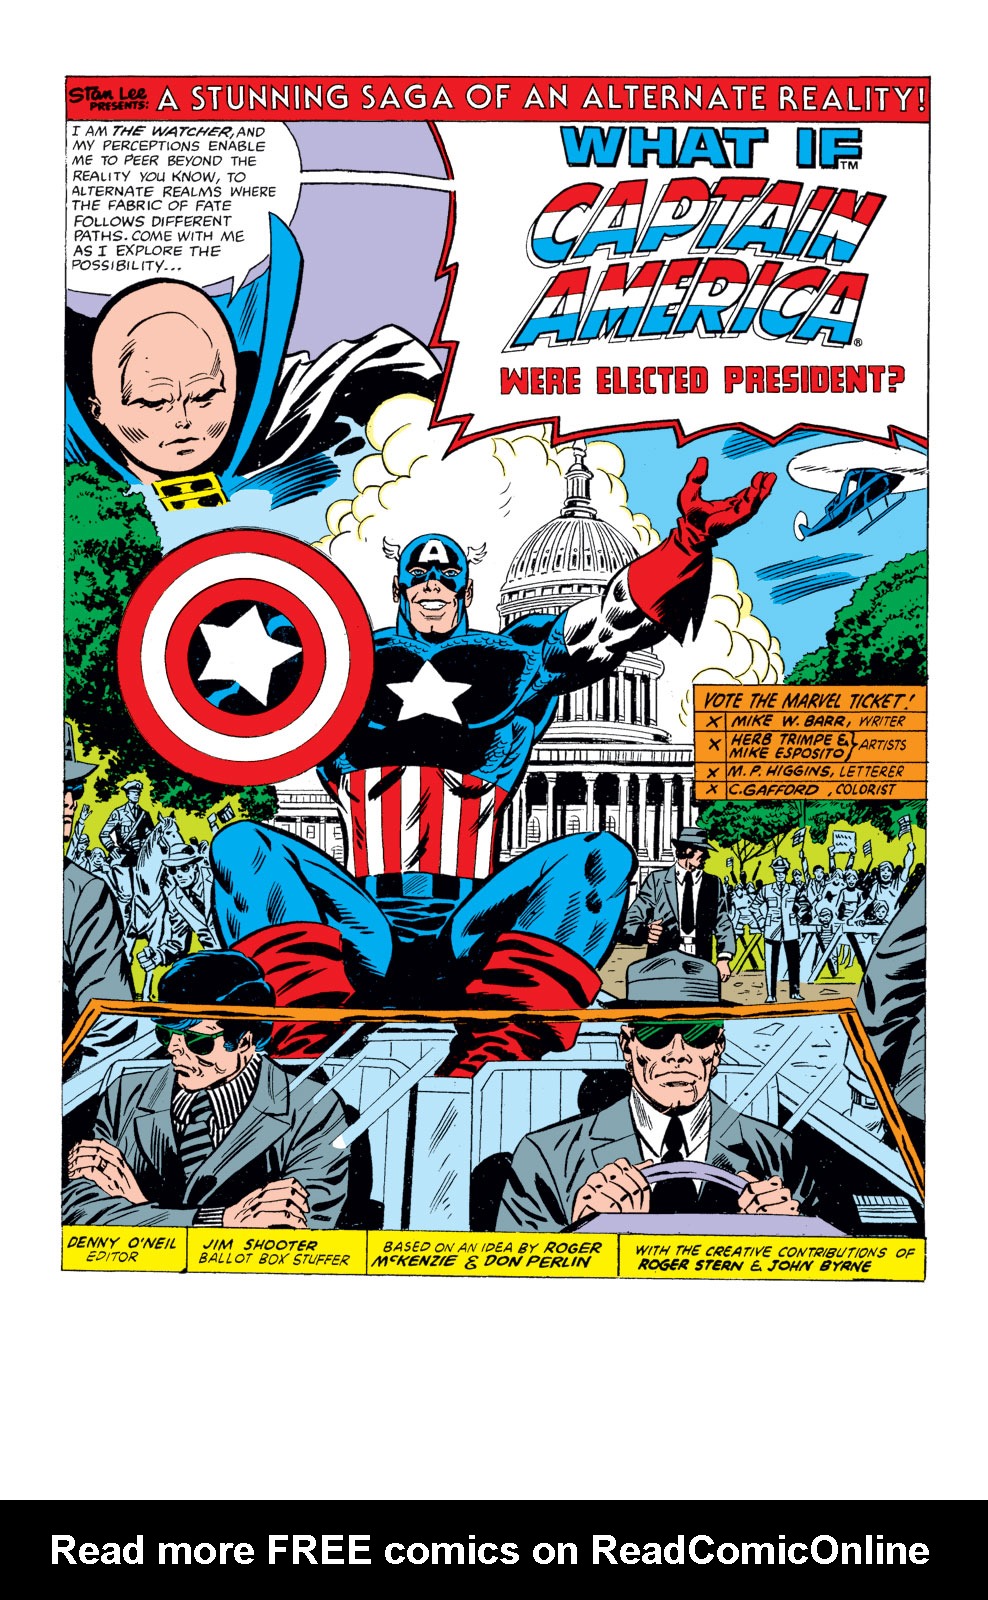 What If? (1977) issue 26 - Captain America had been elected president - Page 2